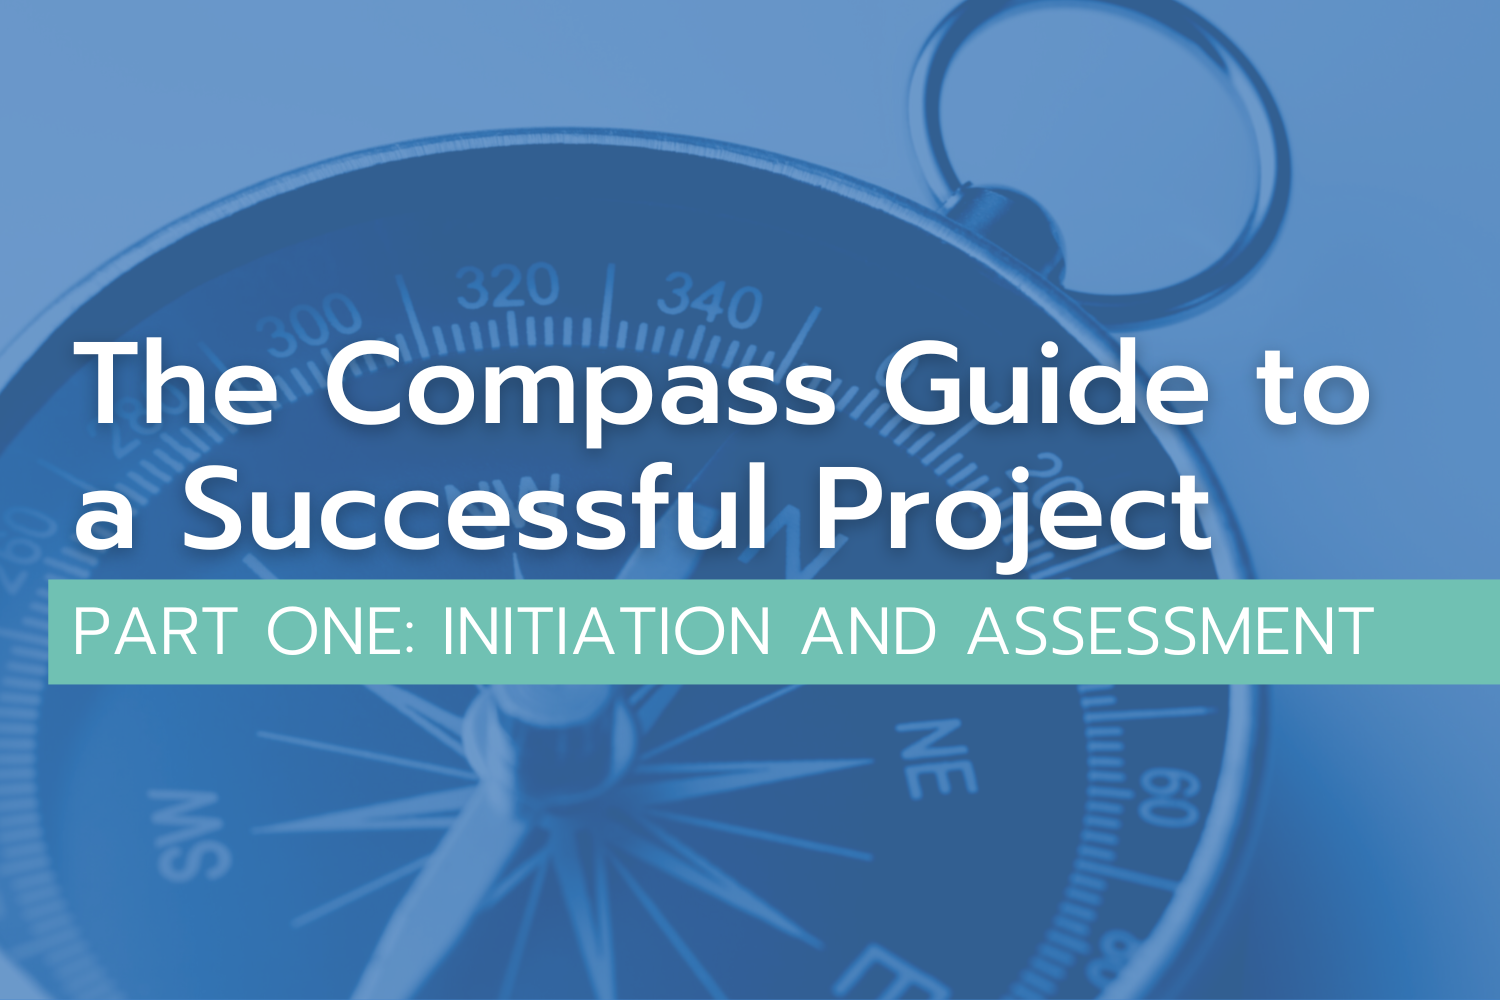 The Compass Guide to a Successful Project-Initiation and Assessment